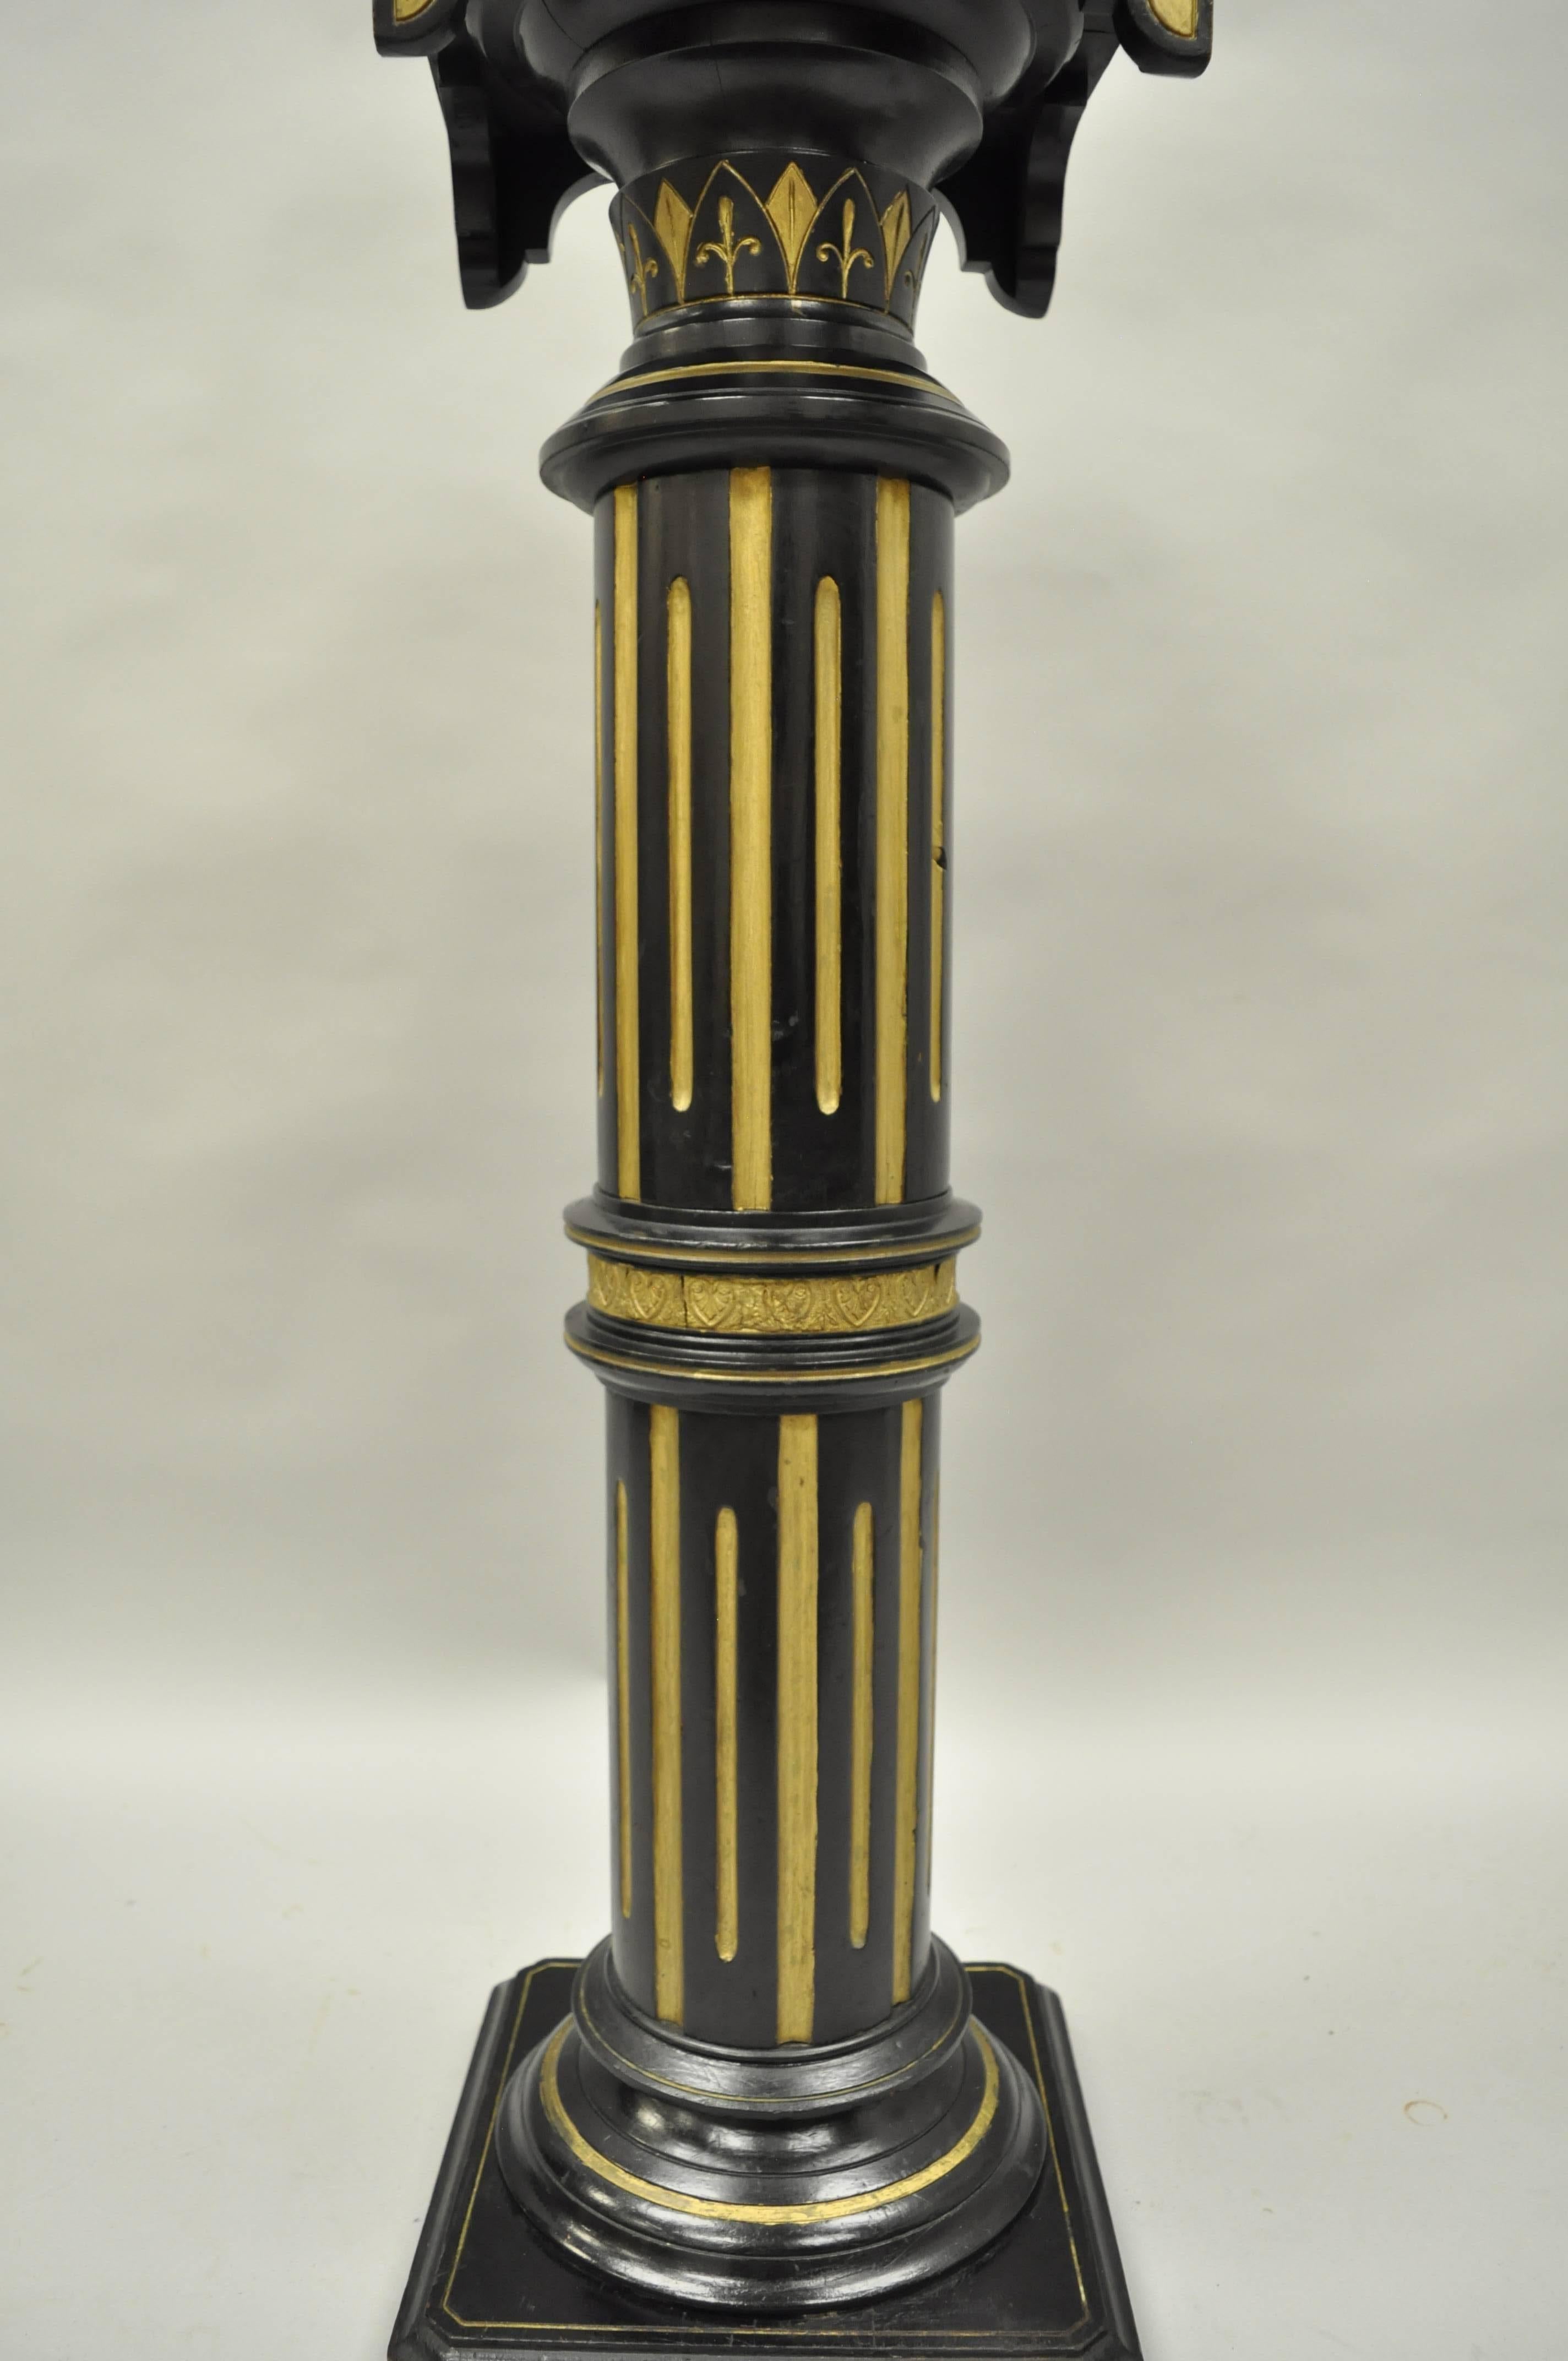 Aesthetic Movement Victorian Aesthetic Column Pedestal Plant Stand Black and Gold Herter Brothers